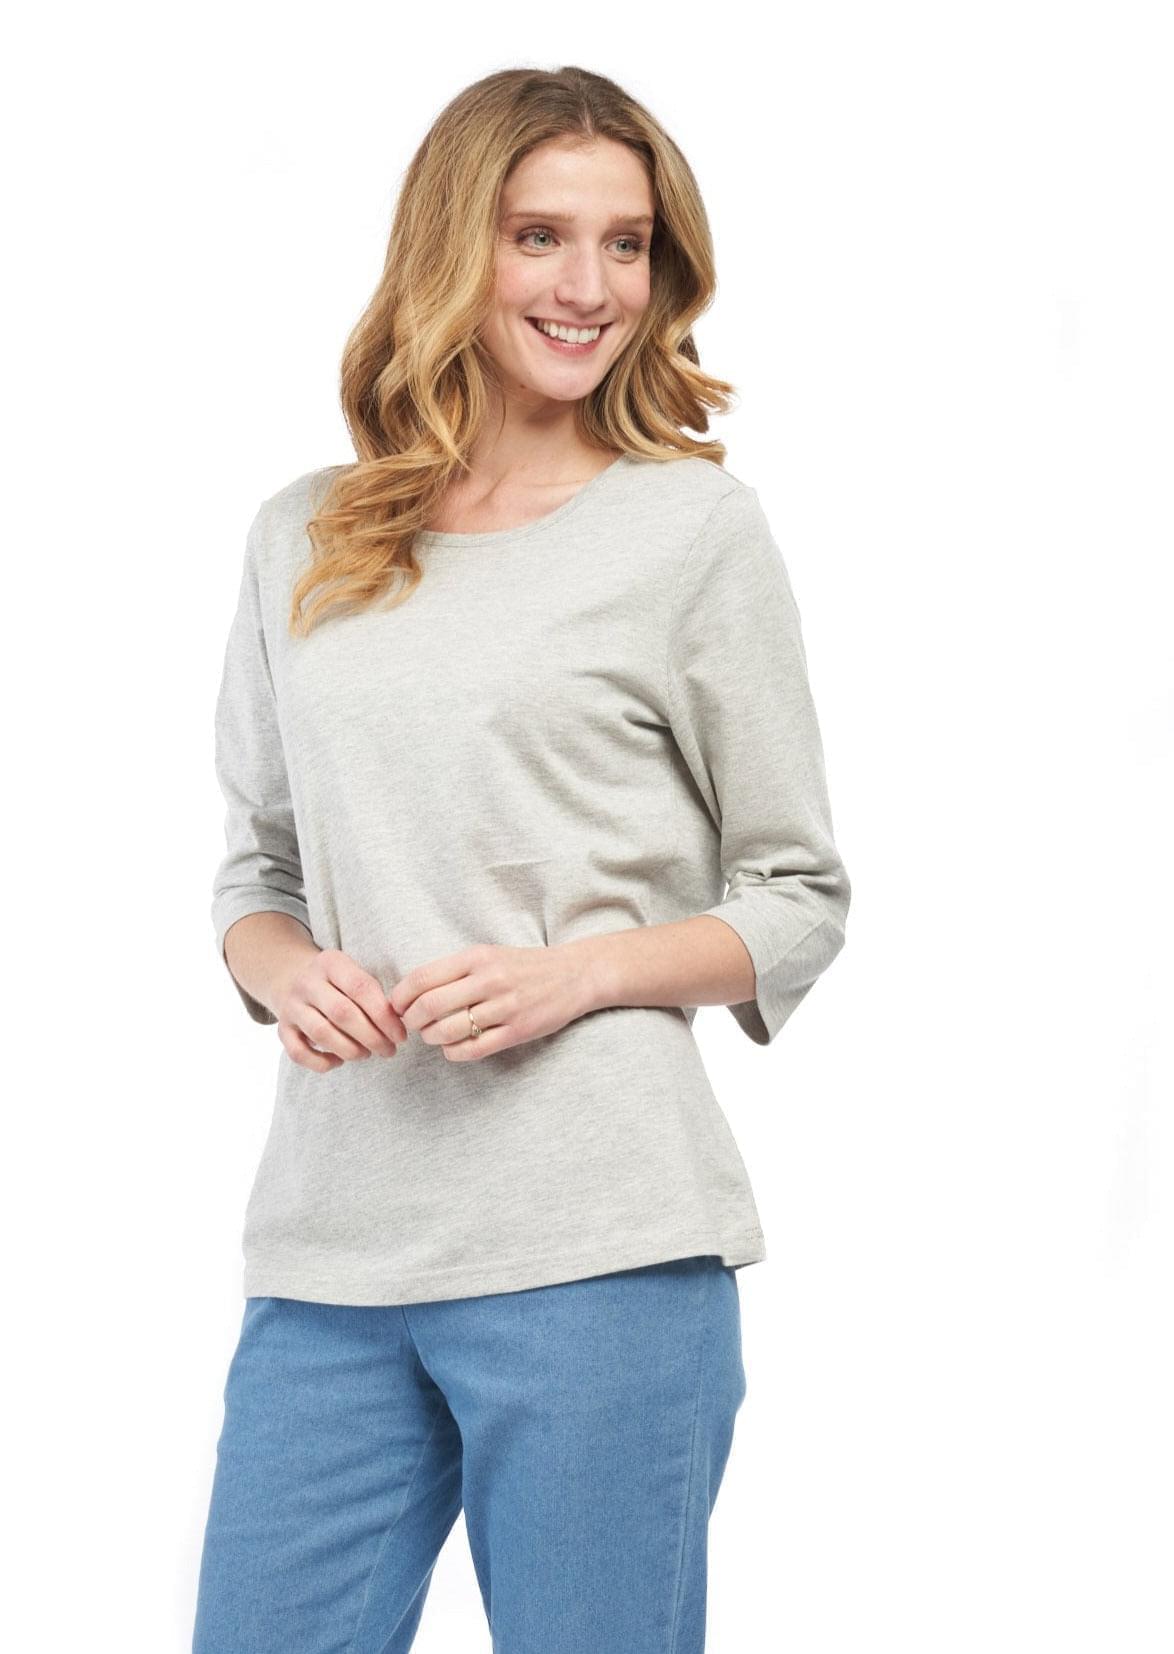 Women's 3/4 Sleeve Crew Neck Top - Comfortable Jersey Knit to Dress Up ...